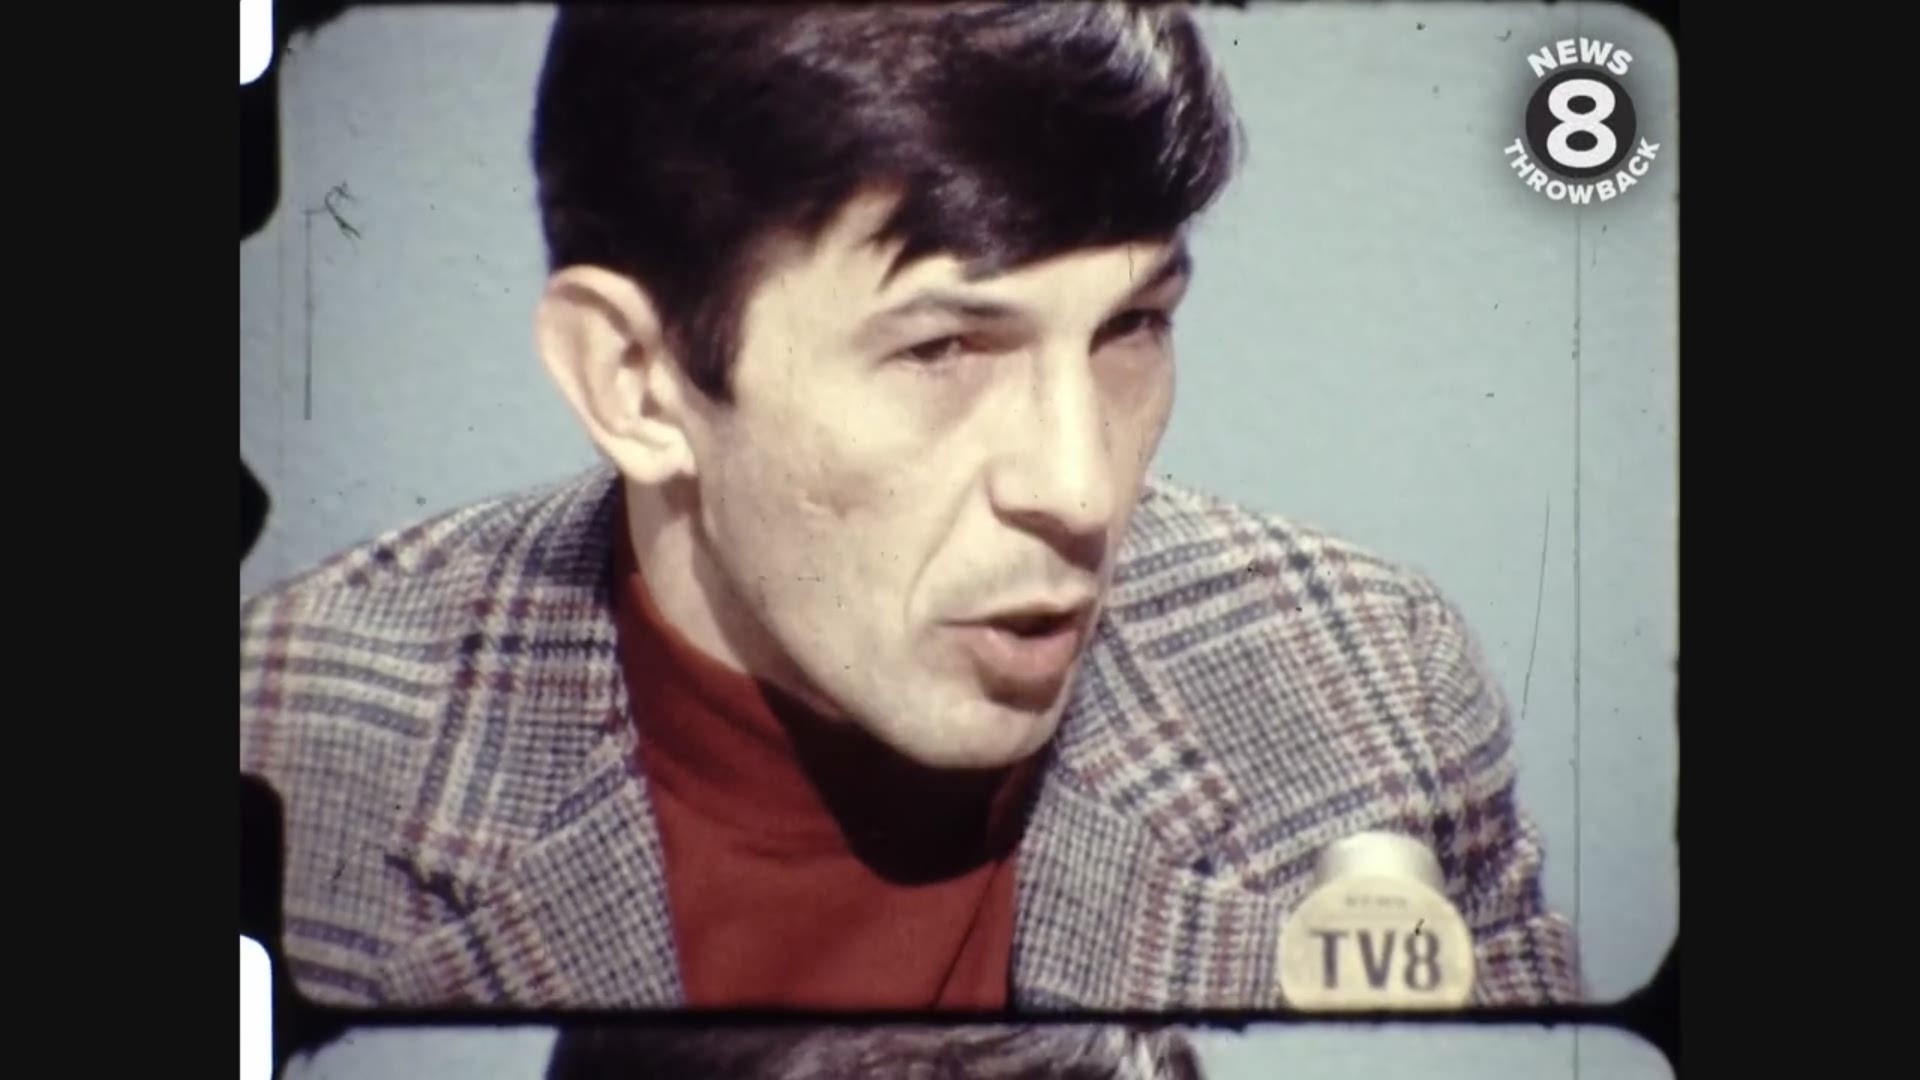 Actor Leonard Nimoy talked to News 8 in 1971 about his starring role in The Old Globe Theater’s production of “The Man in the Glass Booth.”